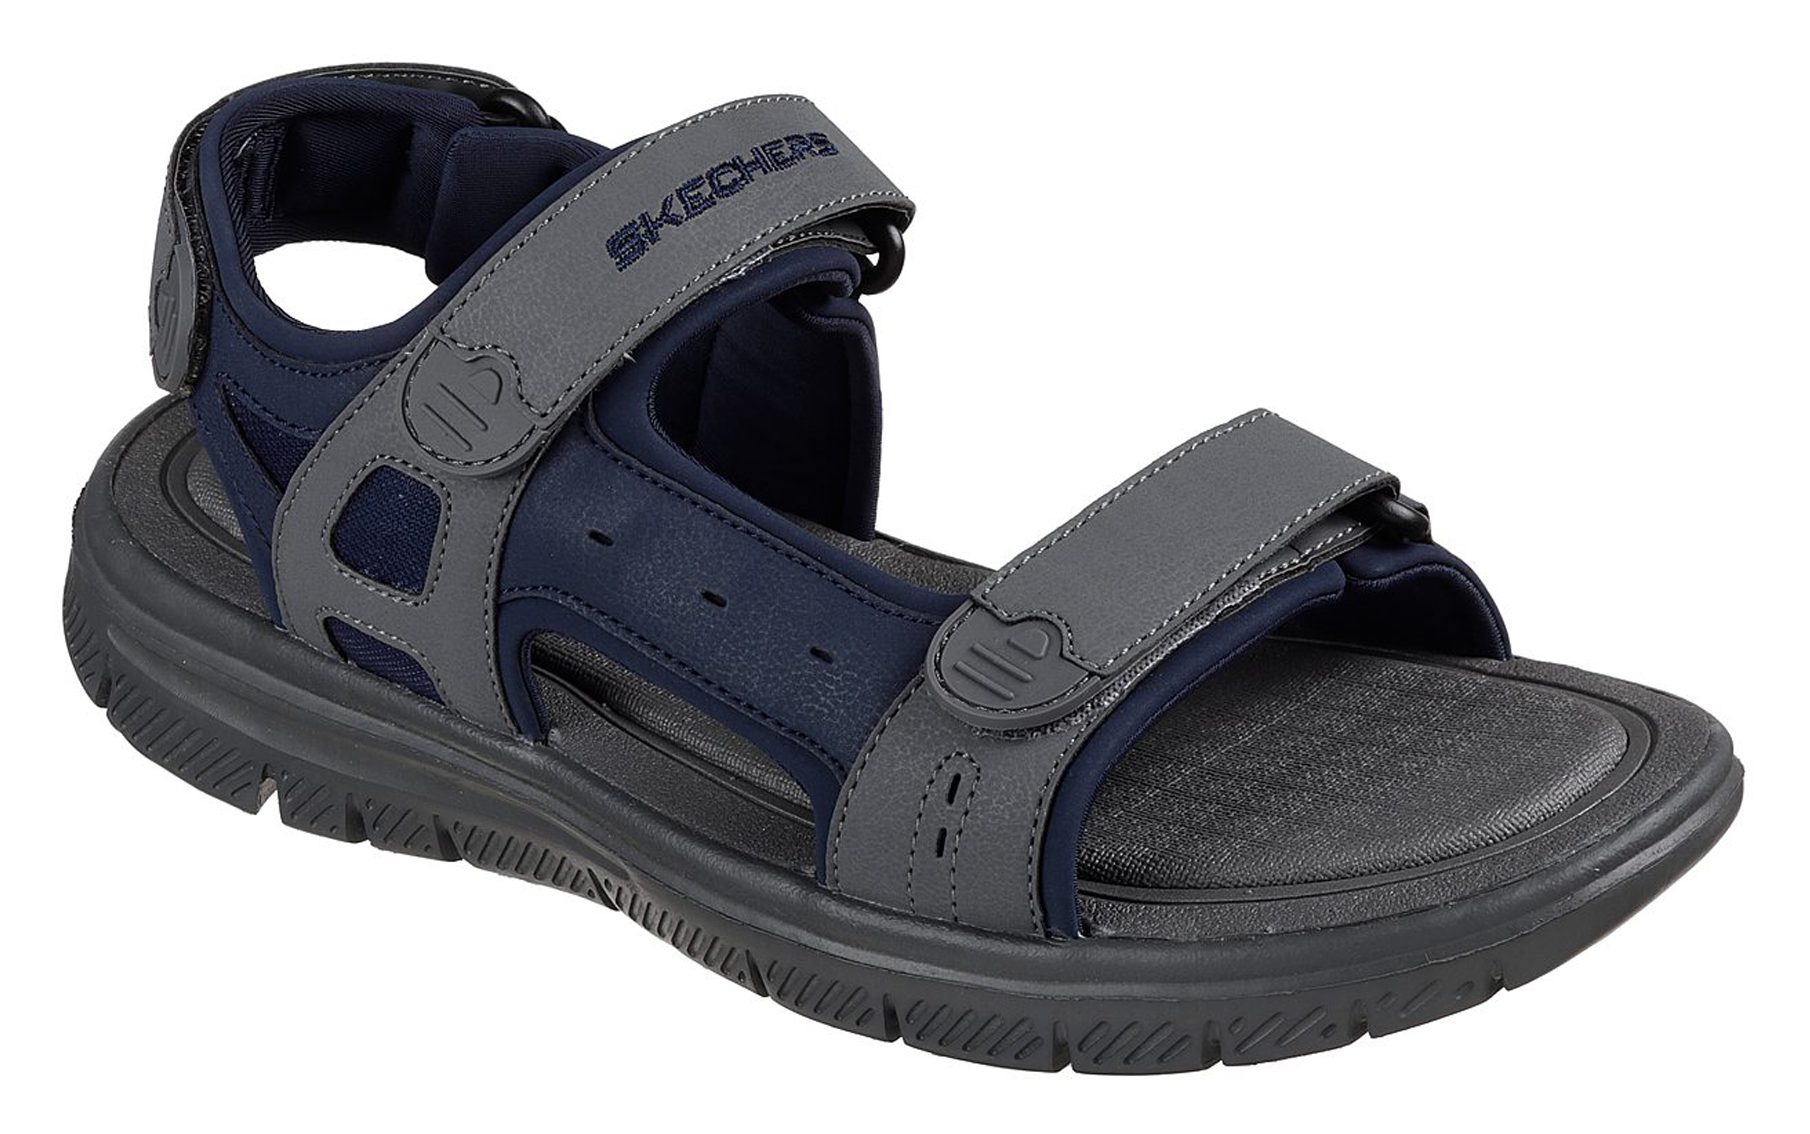 / NVCC - Full Charcoal Flex 51874 Sandals S - Shoes Upwell - Skechers Navy Advantage Humphries